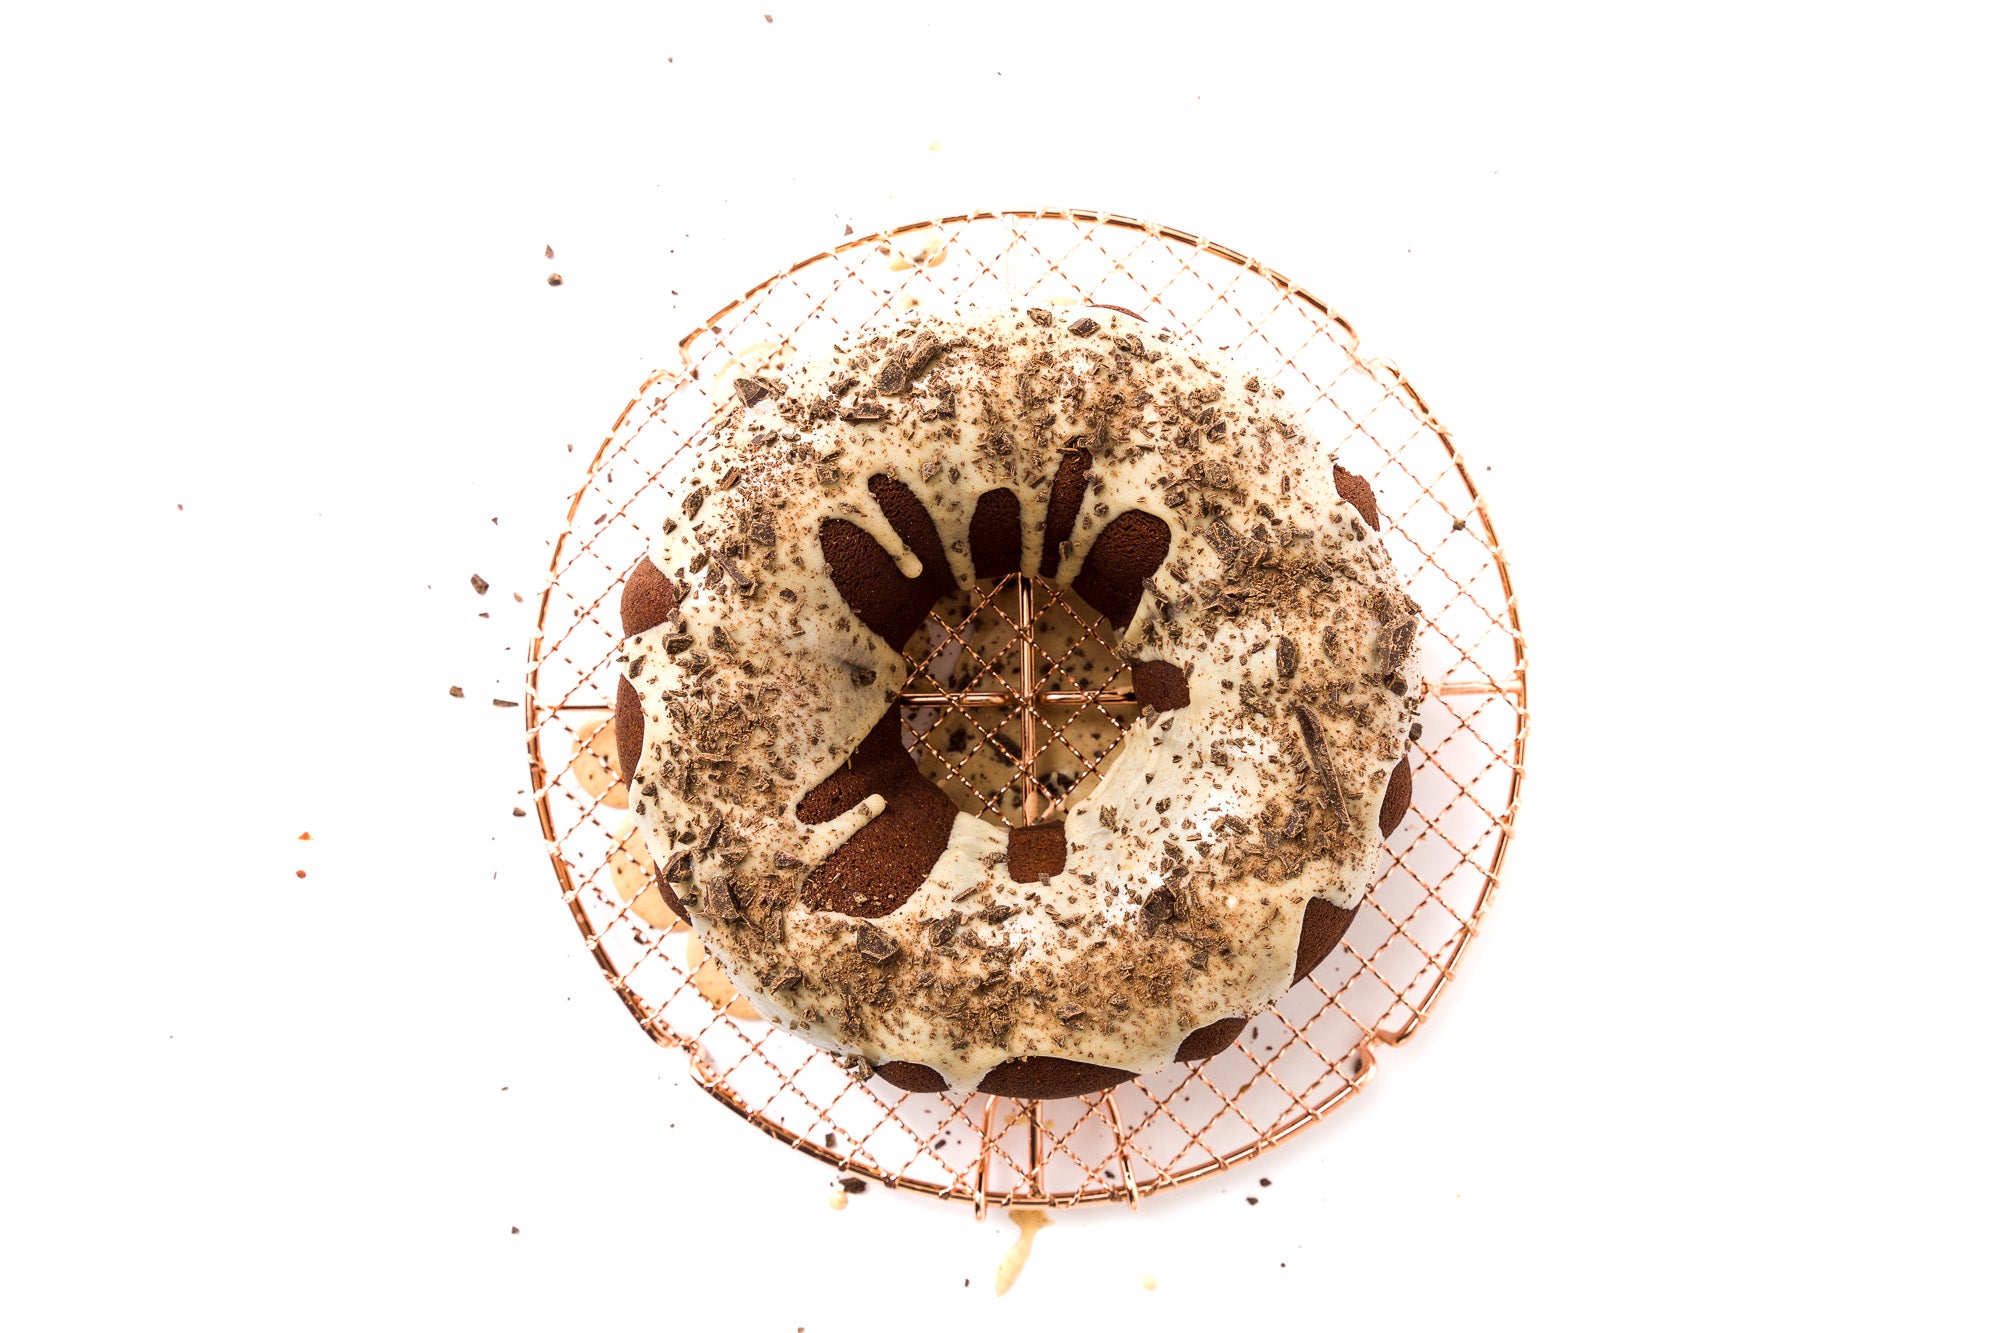 Image from above of Miss Jones Baking Co Chocolate Almond Butter Bundt Cake on baking rack